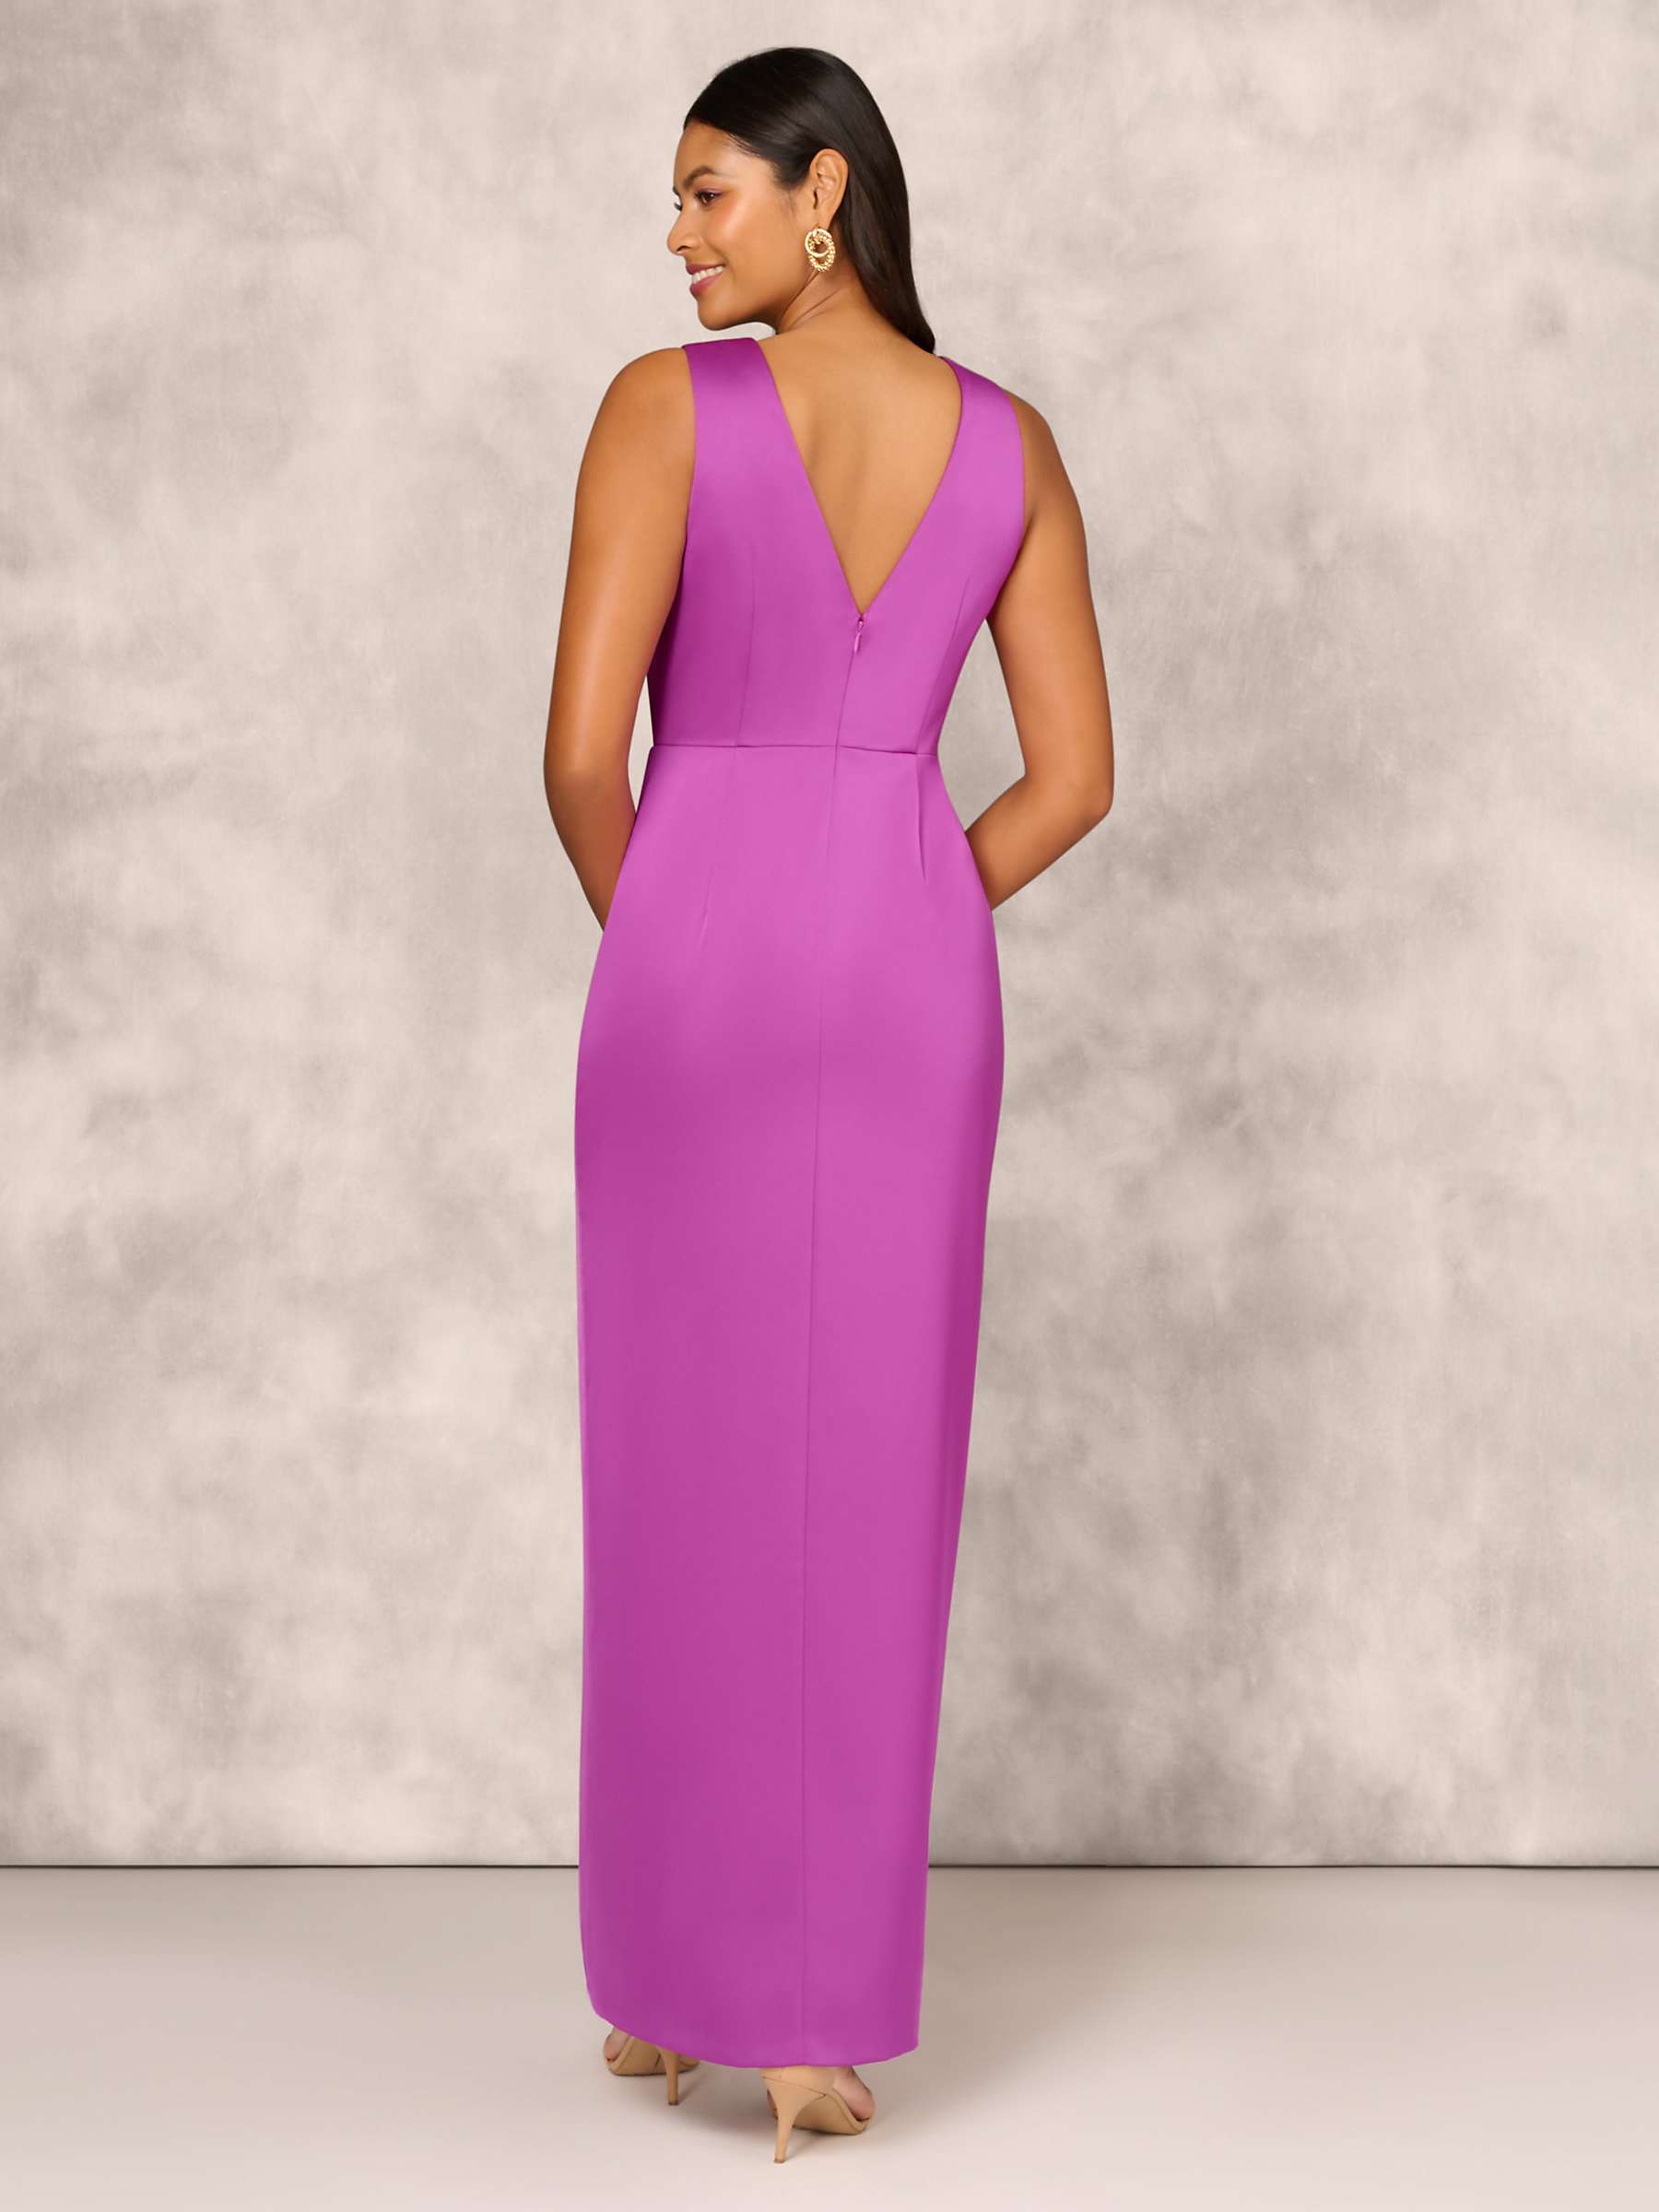 Buy Aidan Mattox by Adrianna Papell Crepe Back Satin Column Maxi Dress, Wild Orchid Online at johnlewis.com